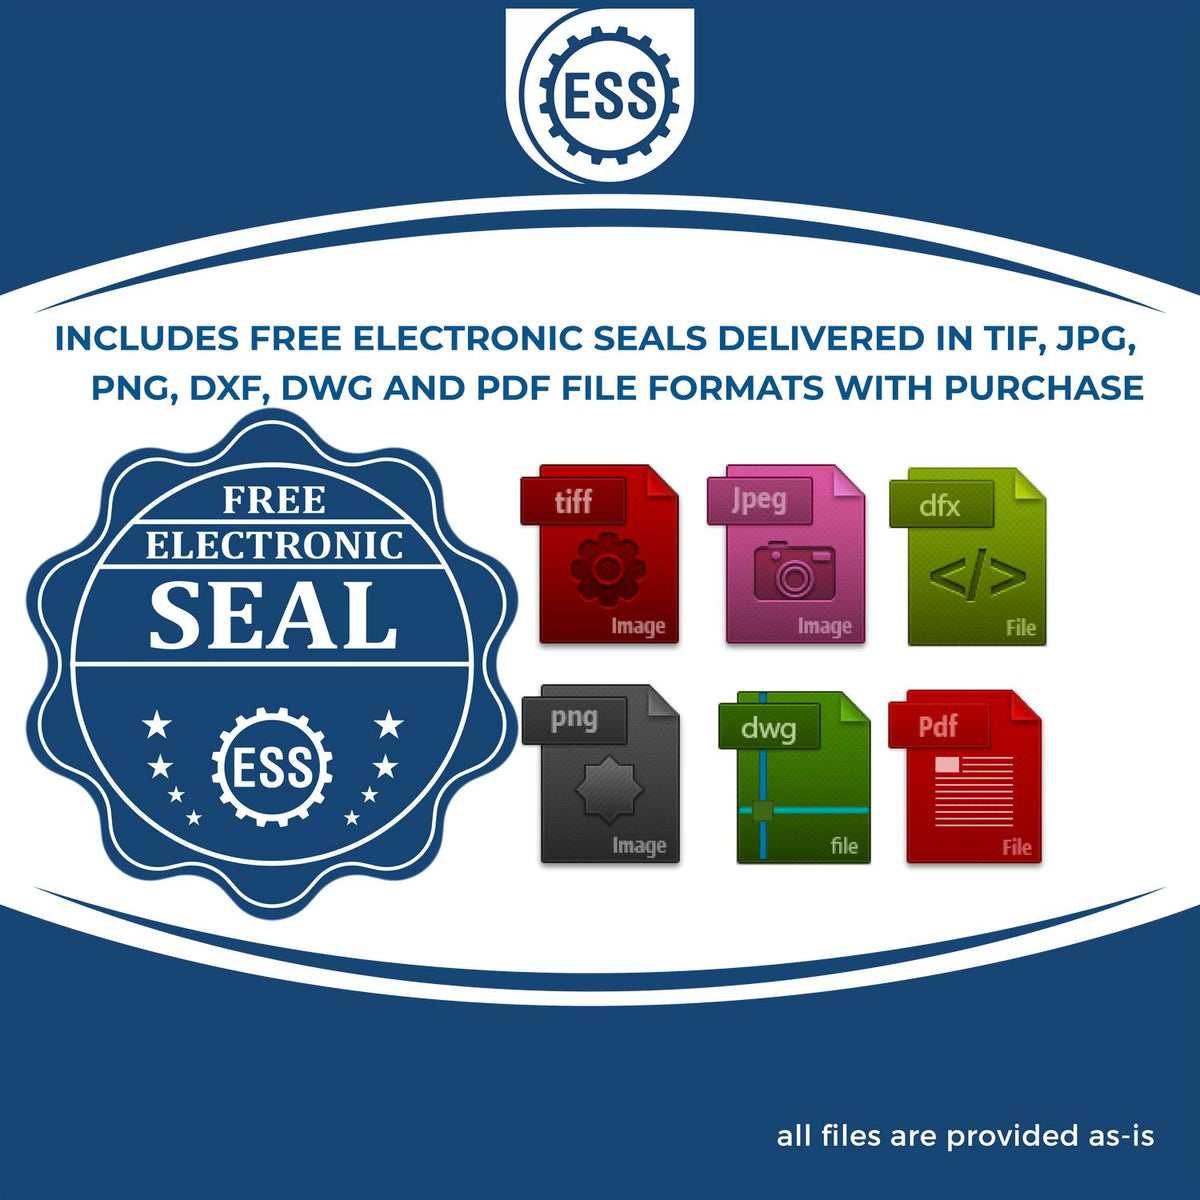 An infographic for the free electronic seal for the Hybrid South Carolina Engineer Seal illustrating the different file type icons such as DXF, DWG, TIF, JPG and PNG.